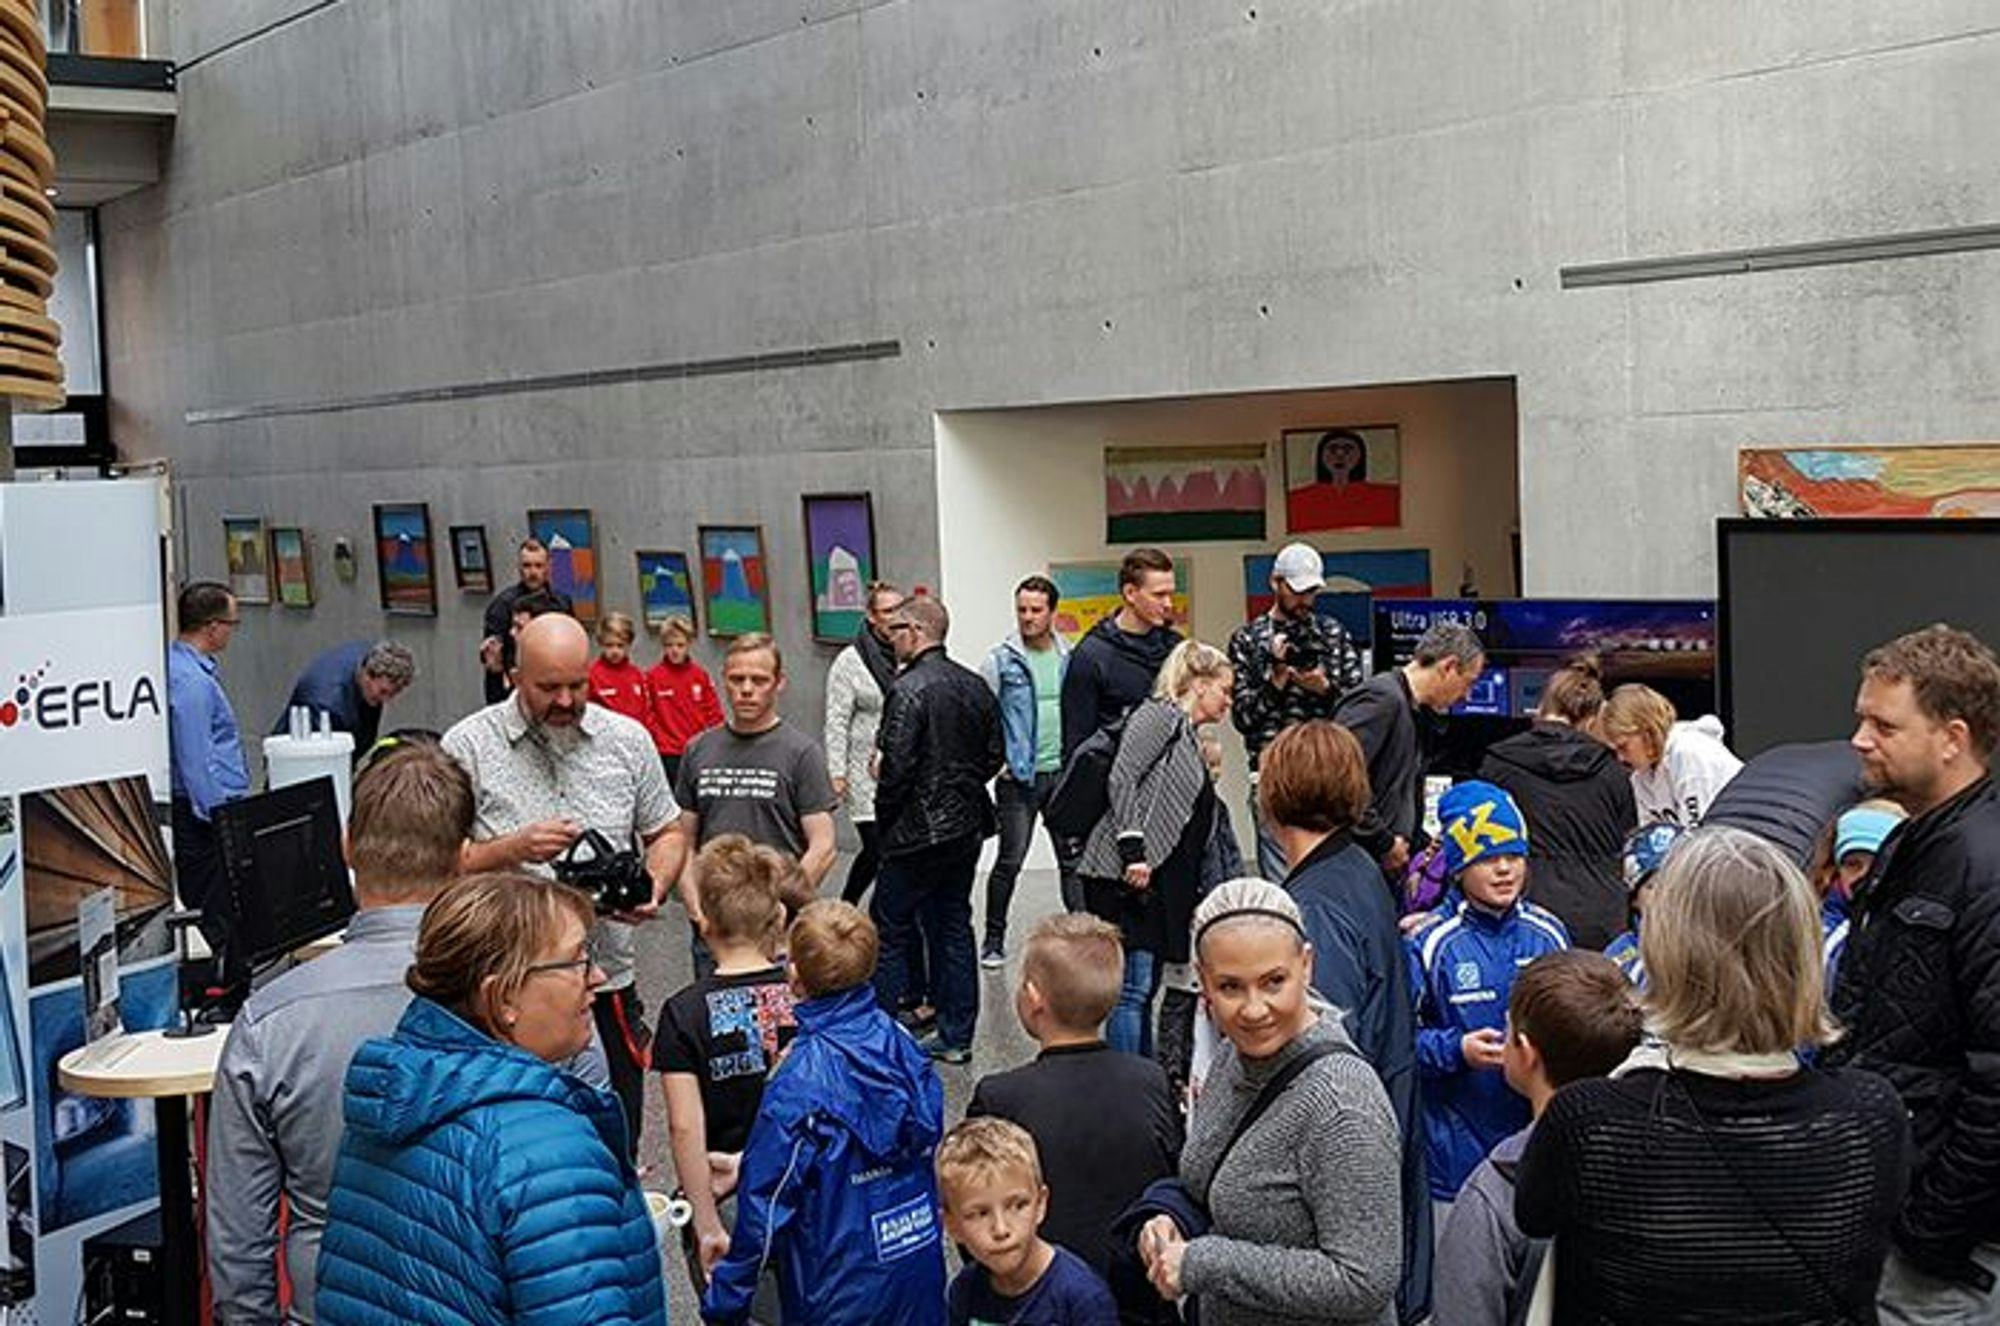 A crowded indoor event with people gathered around an exhibition stand